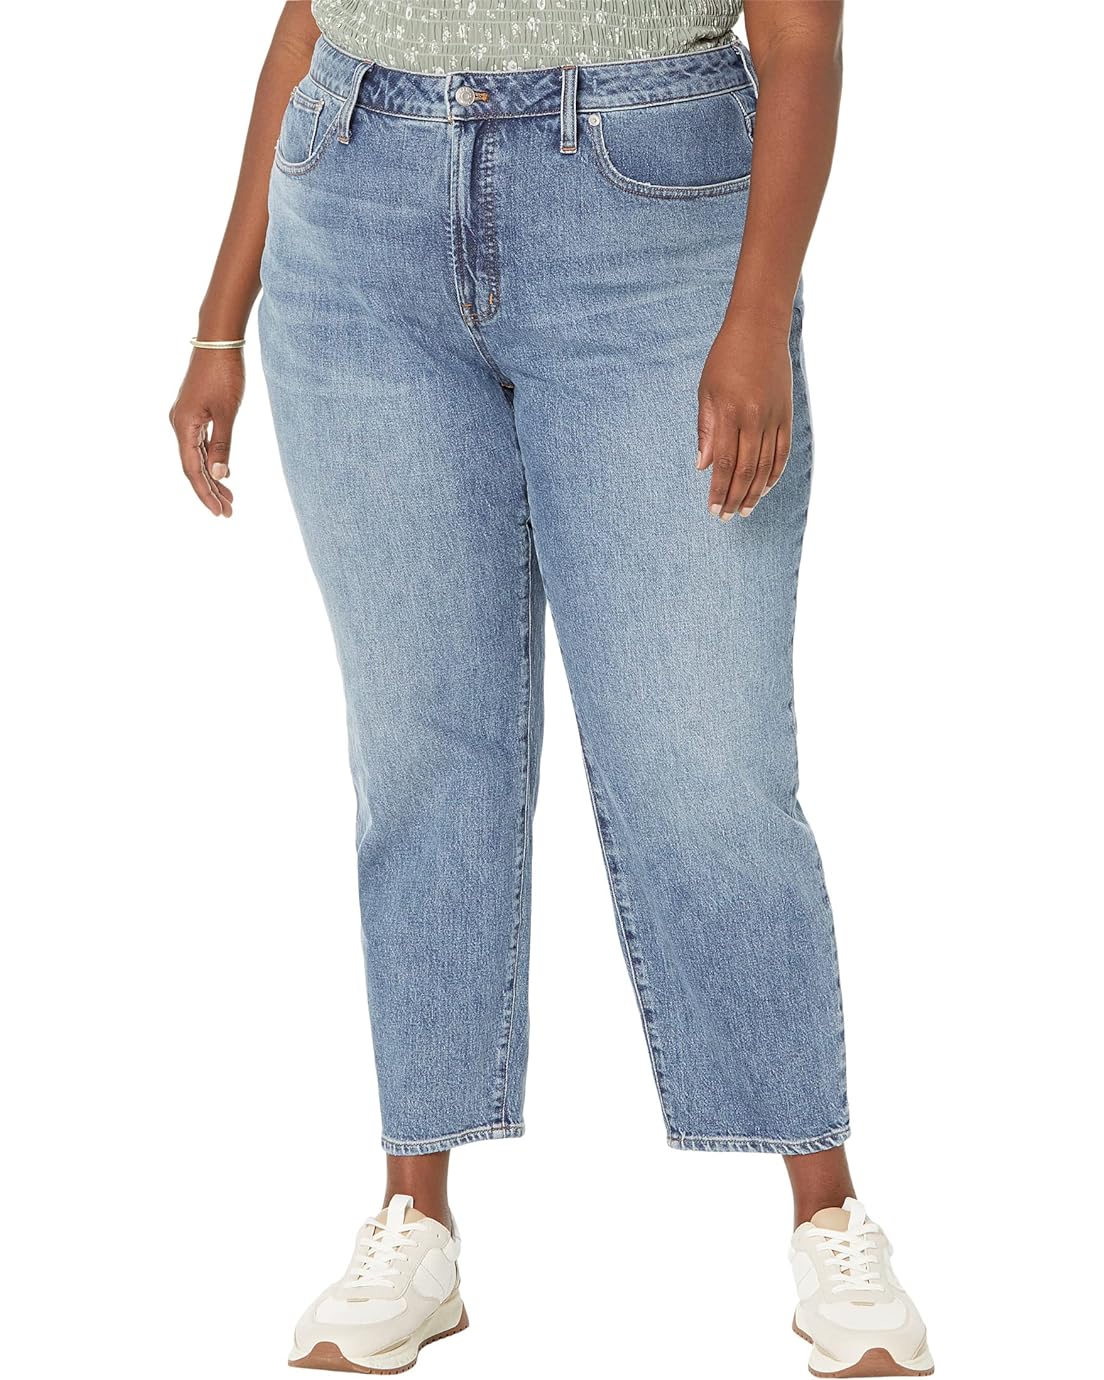 Madewell The Plus Curvy Perfect Vintage Jean in Heathcote Wash